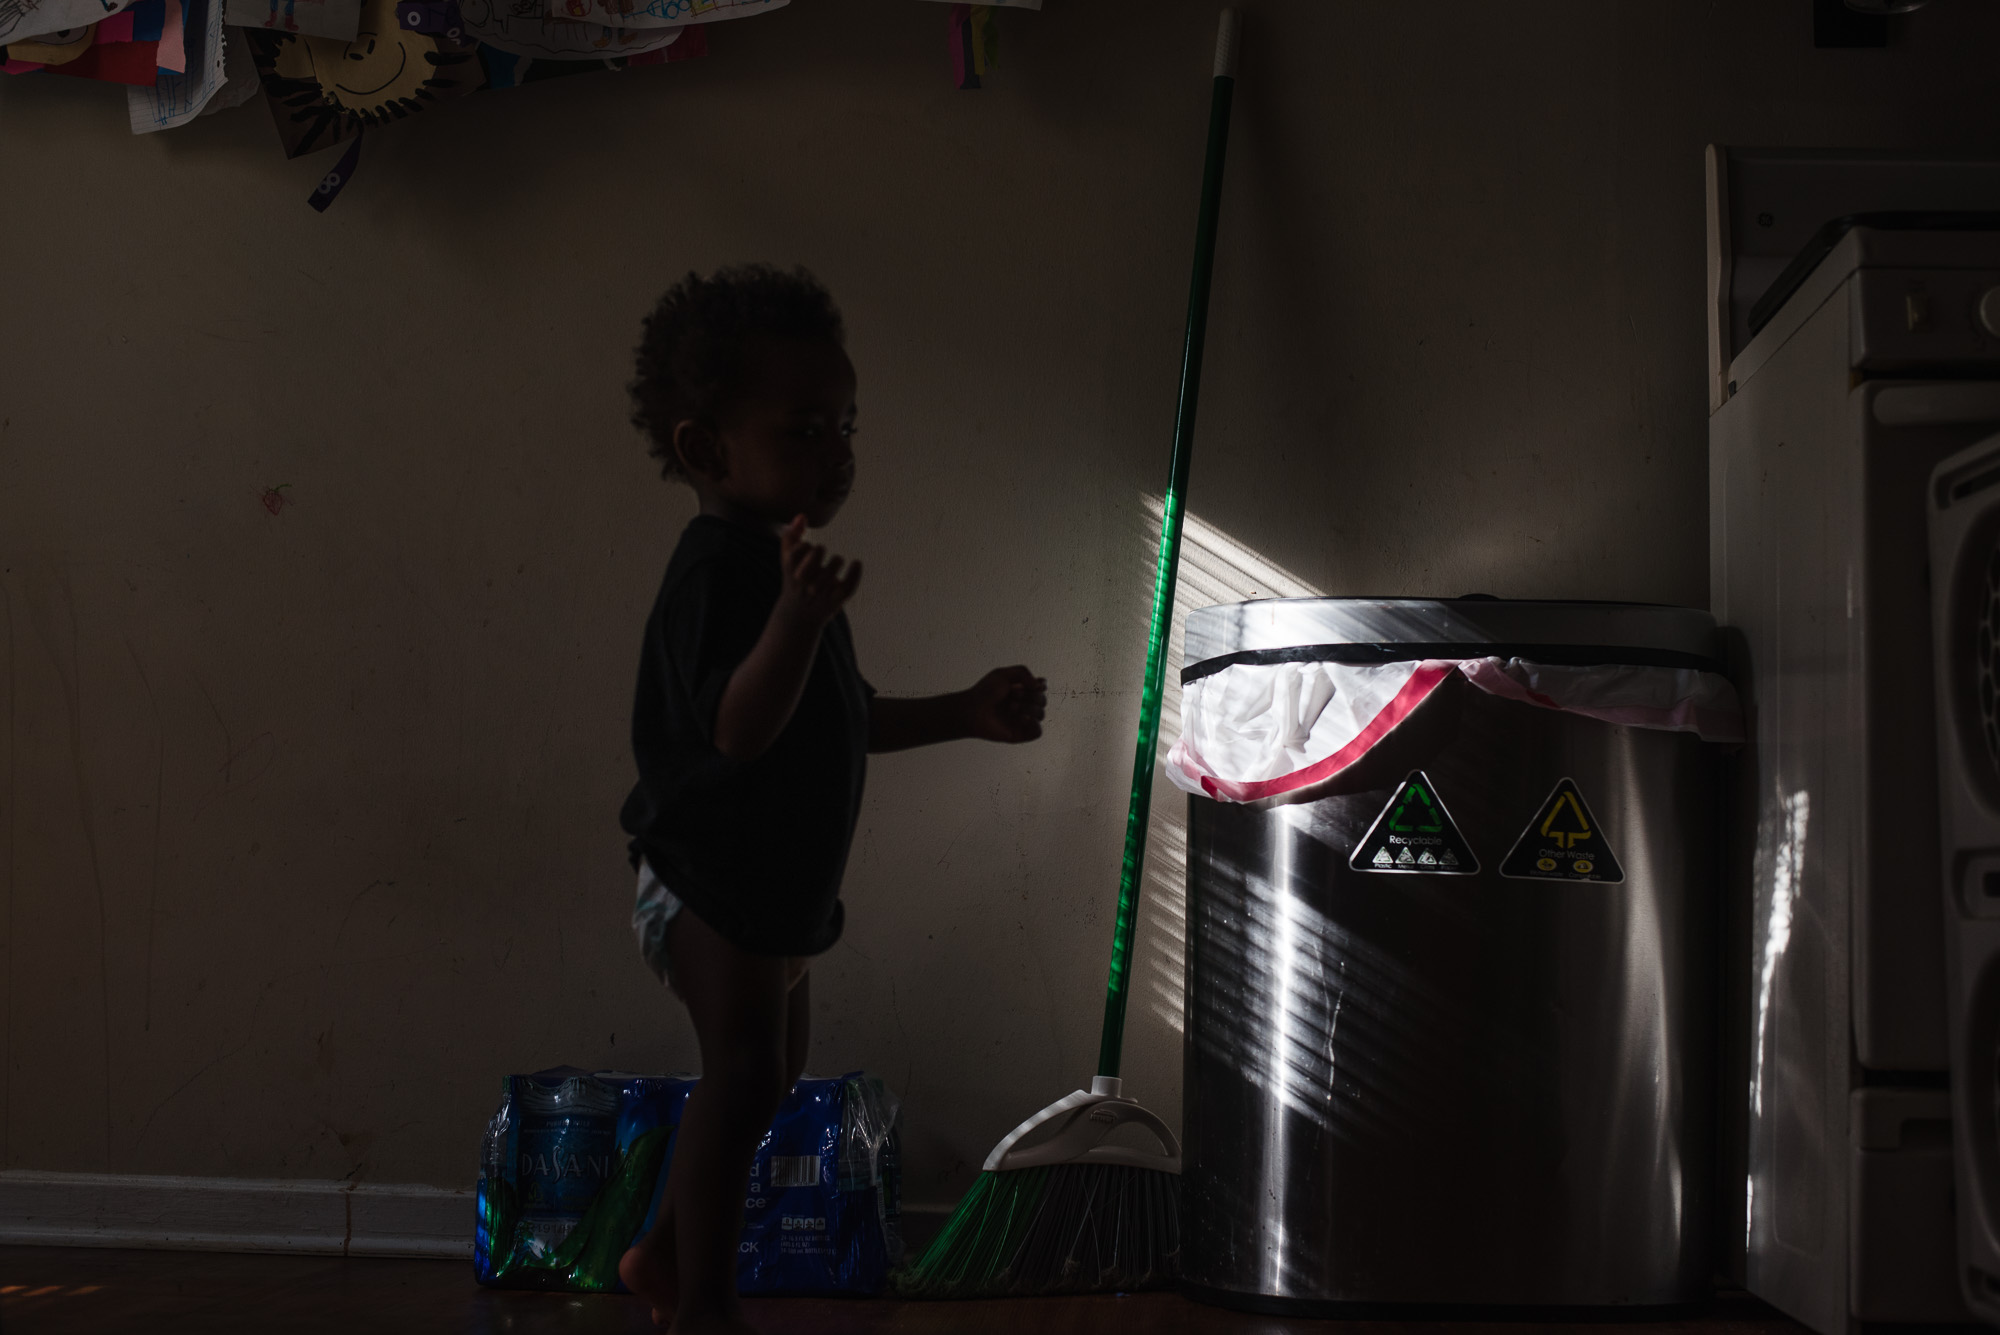 sunlight on trashcan with boy's silhouette - documentary family photography